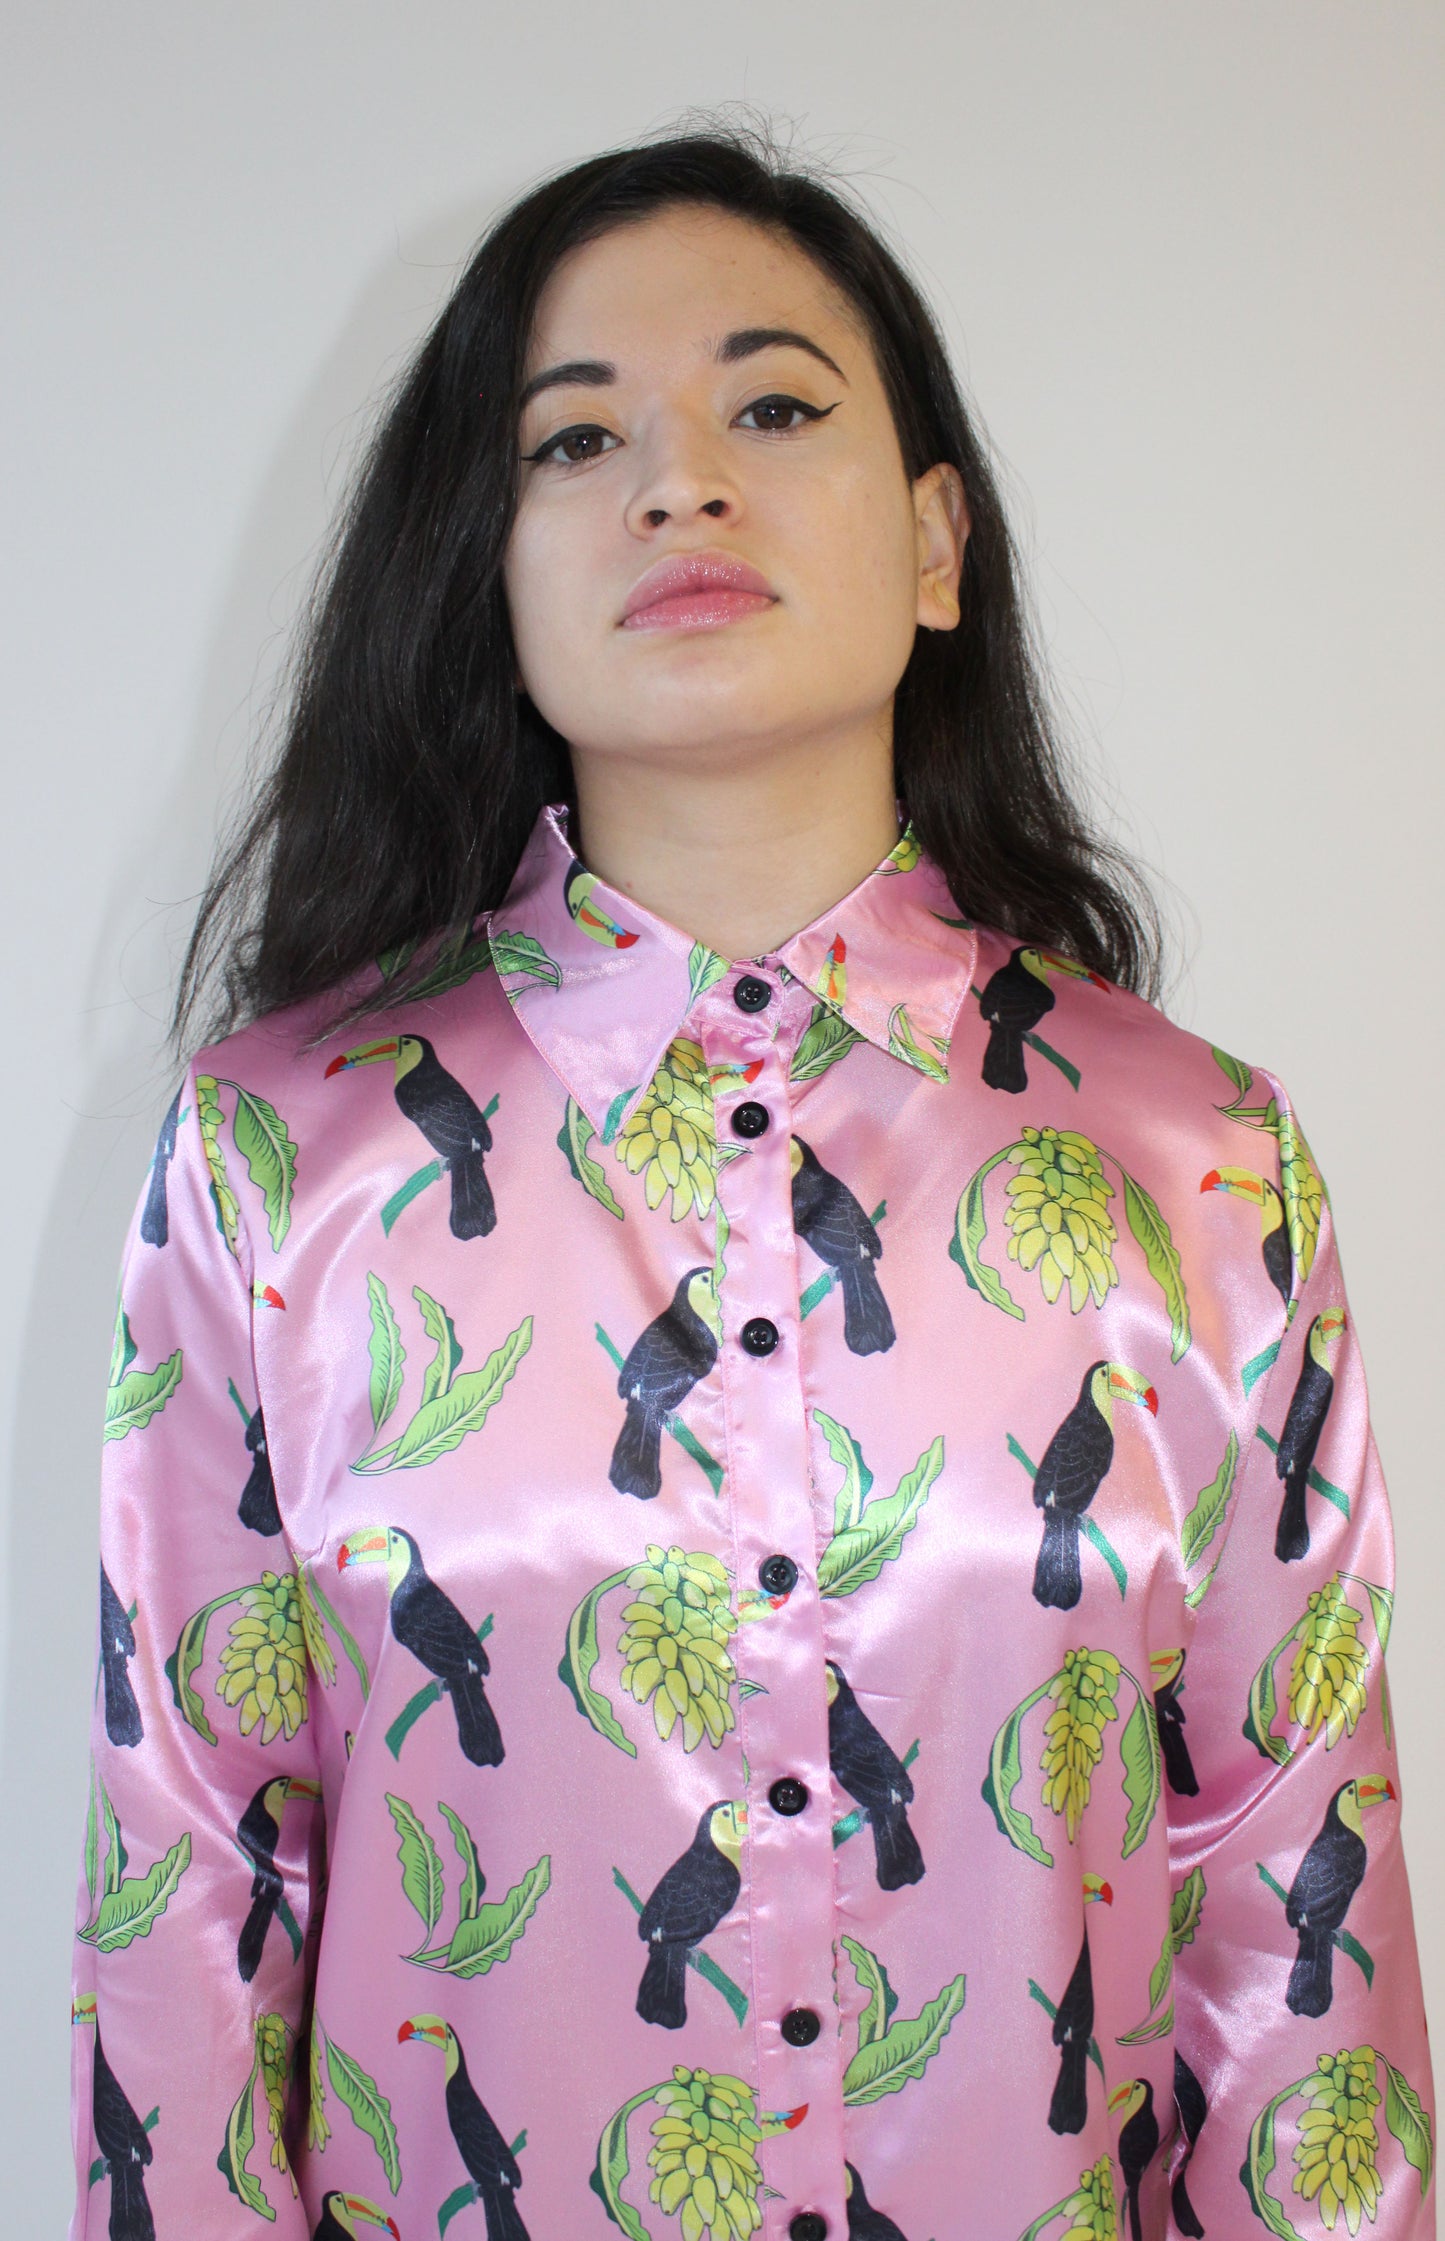 Tropical toucan banana baby pink satin button down blouse rPET recycled polyester eco-friendly party shirt vacation outfit